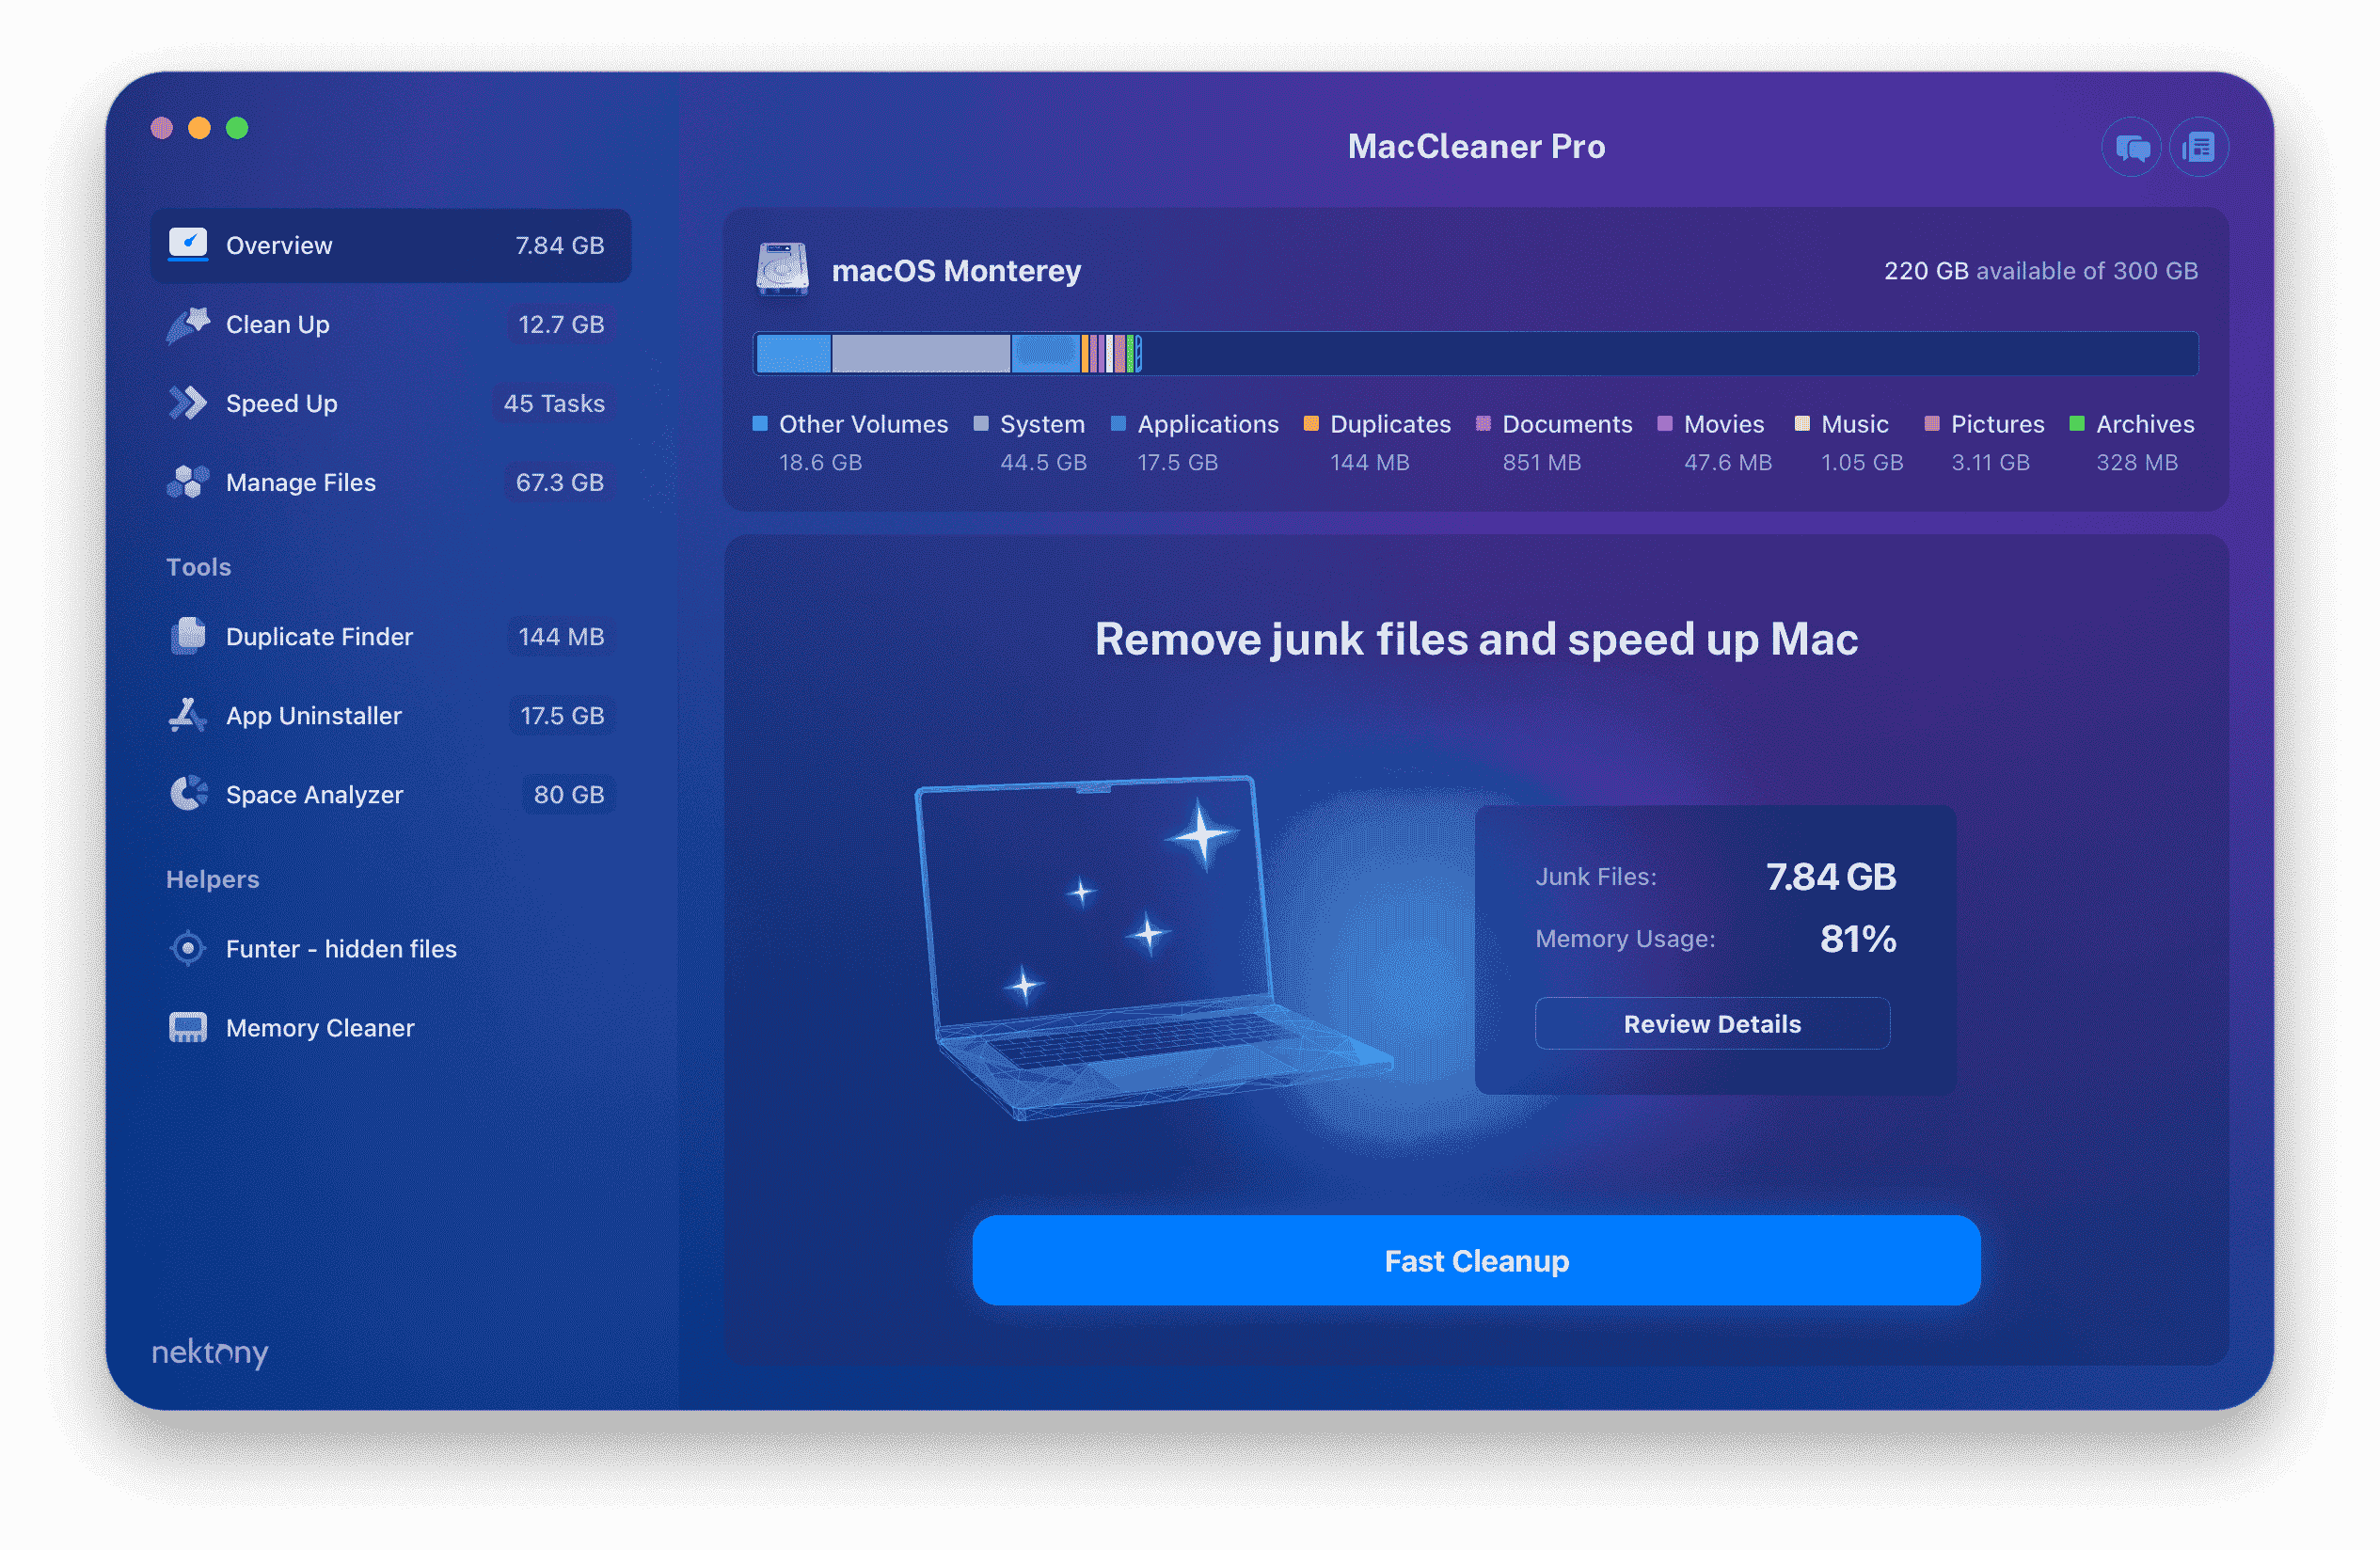 MacCleaner Pro window showing Overview tab